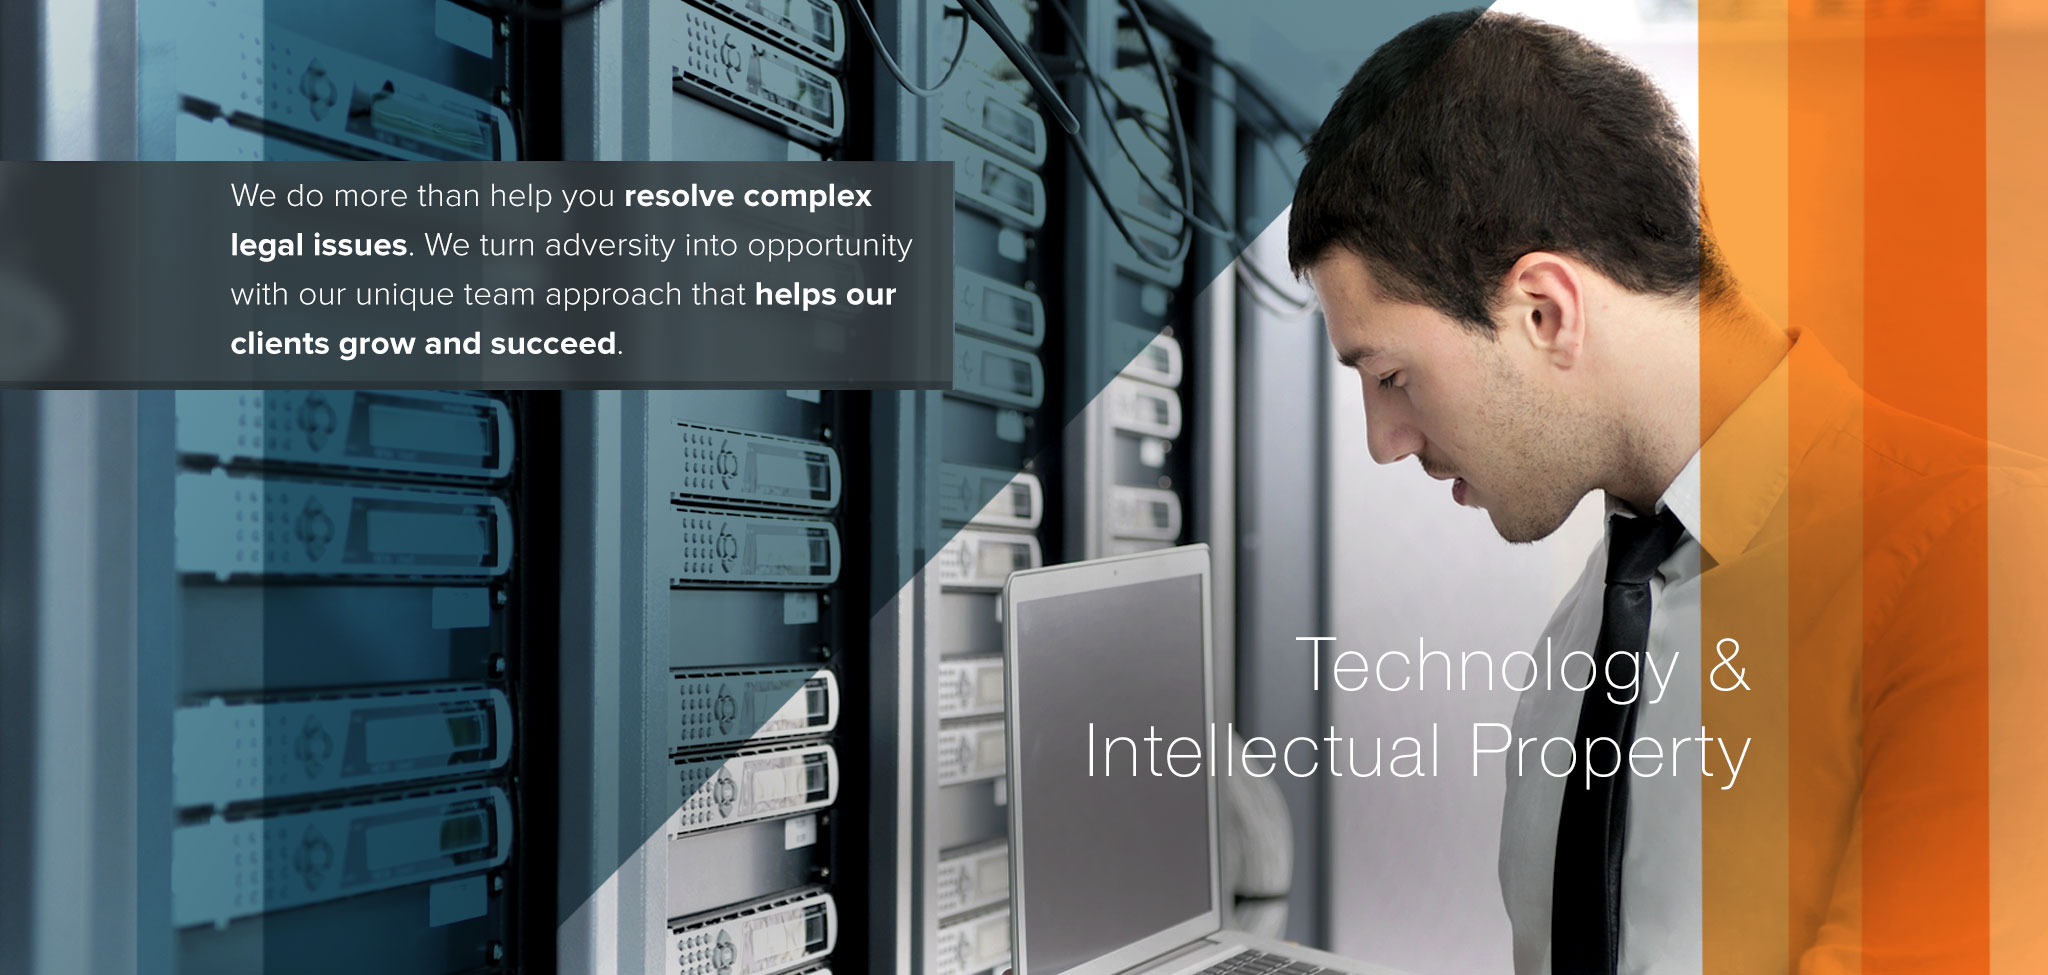 Technology & Intellectual Property. We do more than help your resolve complex legal issues.